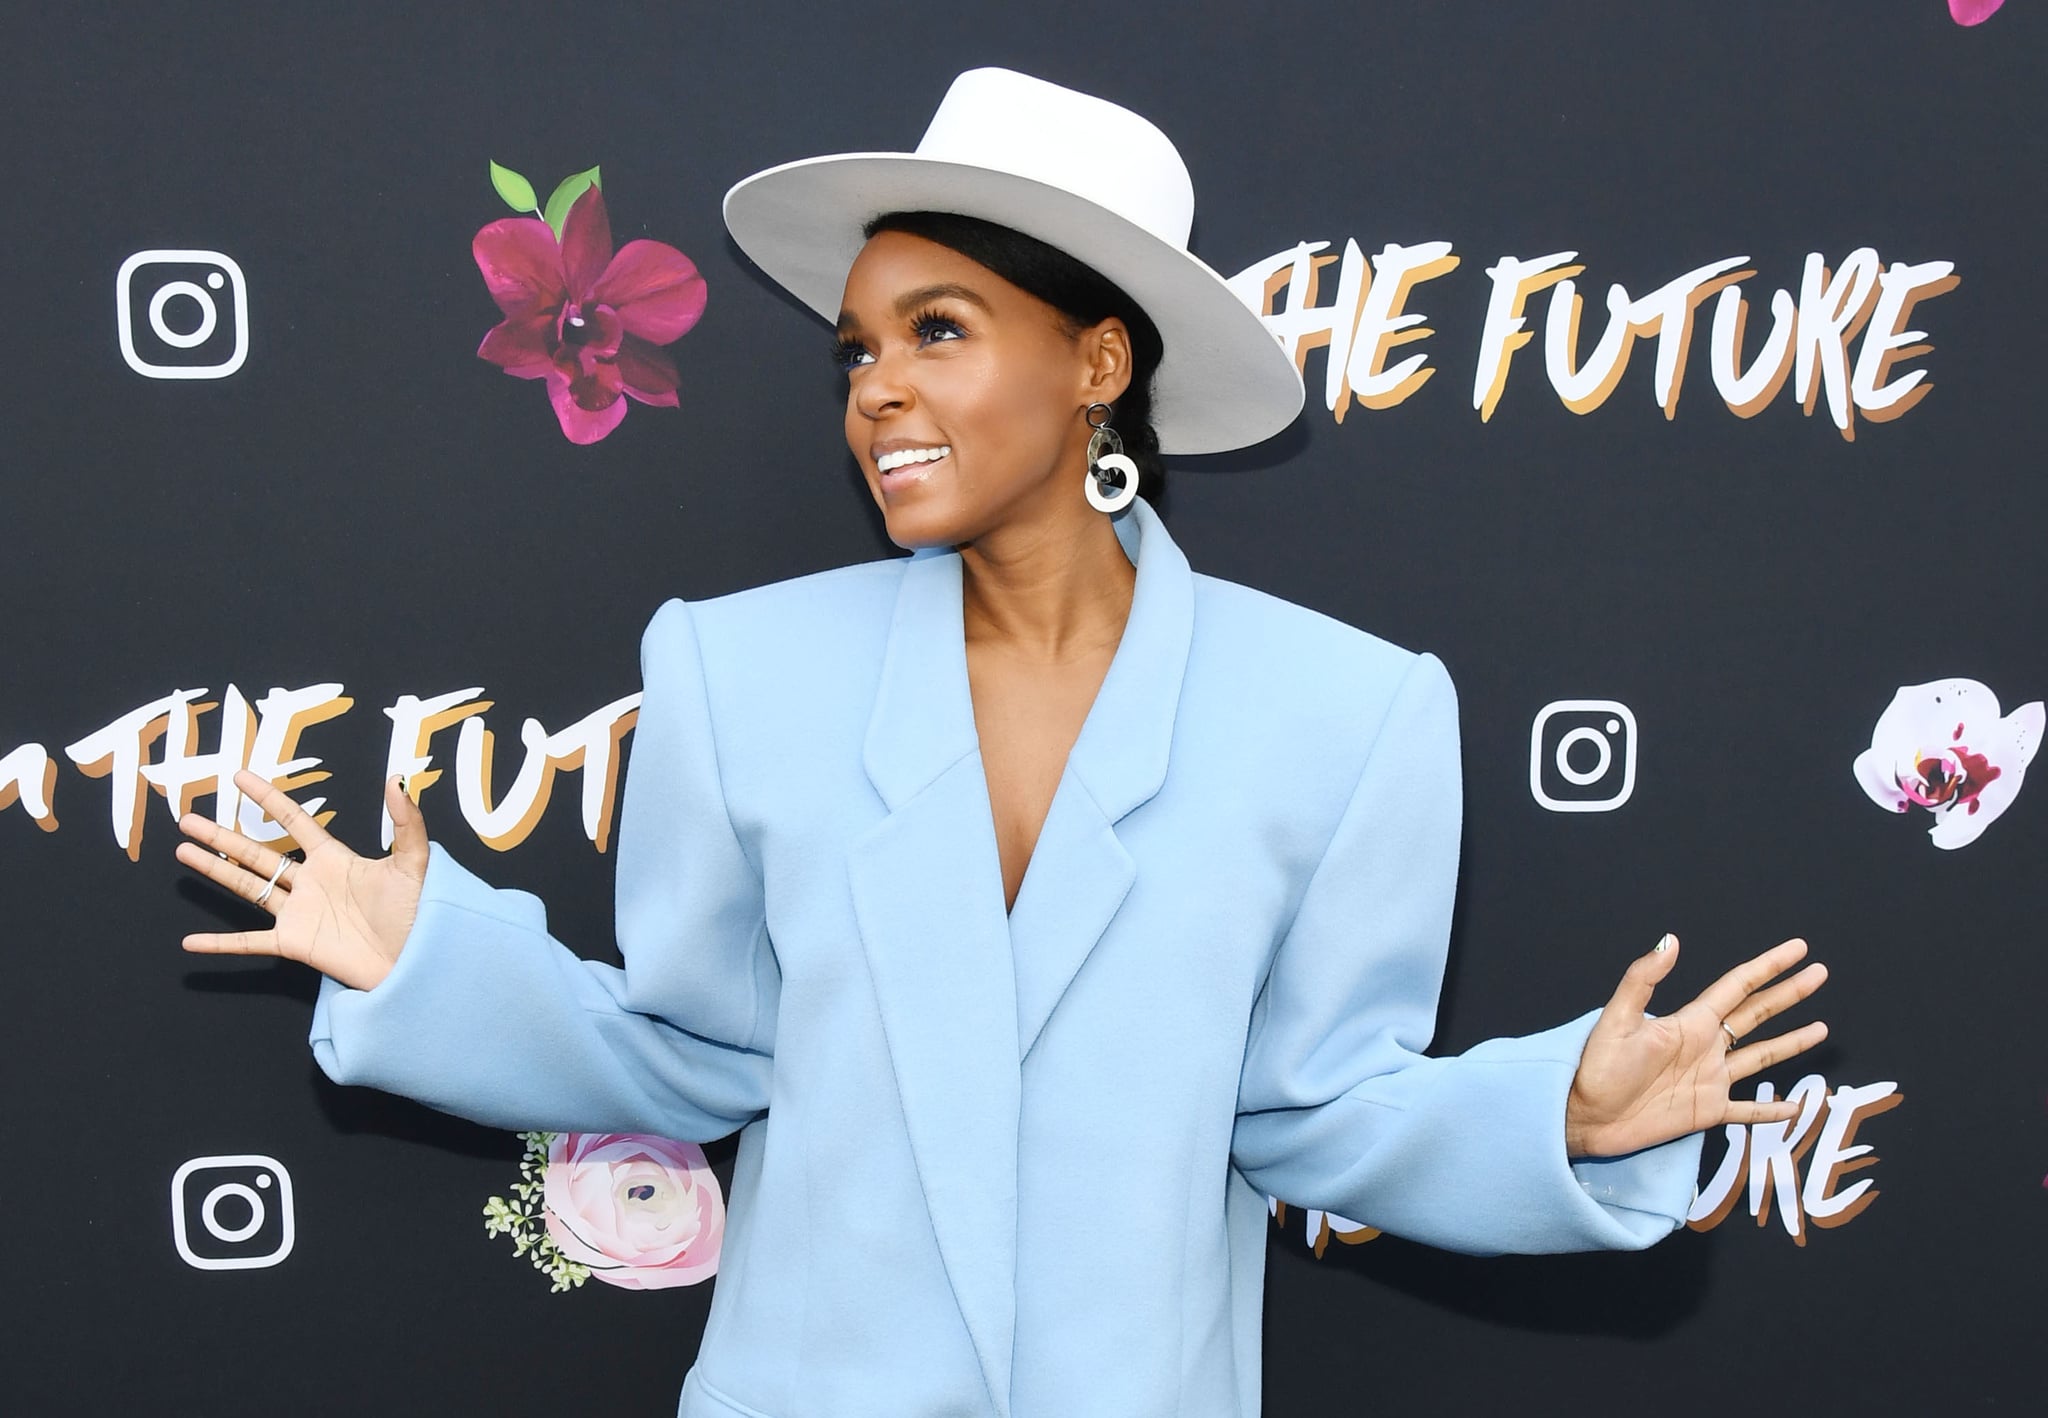 LOS ANGELES, CALIFORNIA - FEBRUARY 08: Janelle Monae attends Janelle Monae x Instagram Fem The Future Brunch on February 08, 2019 in Los Angeles, California. (Photo by Amy Sussman/Getty Images)